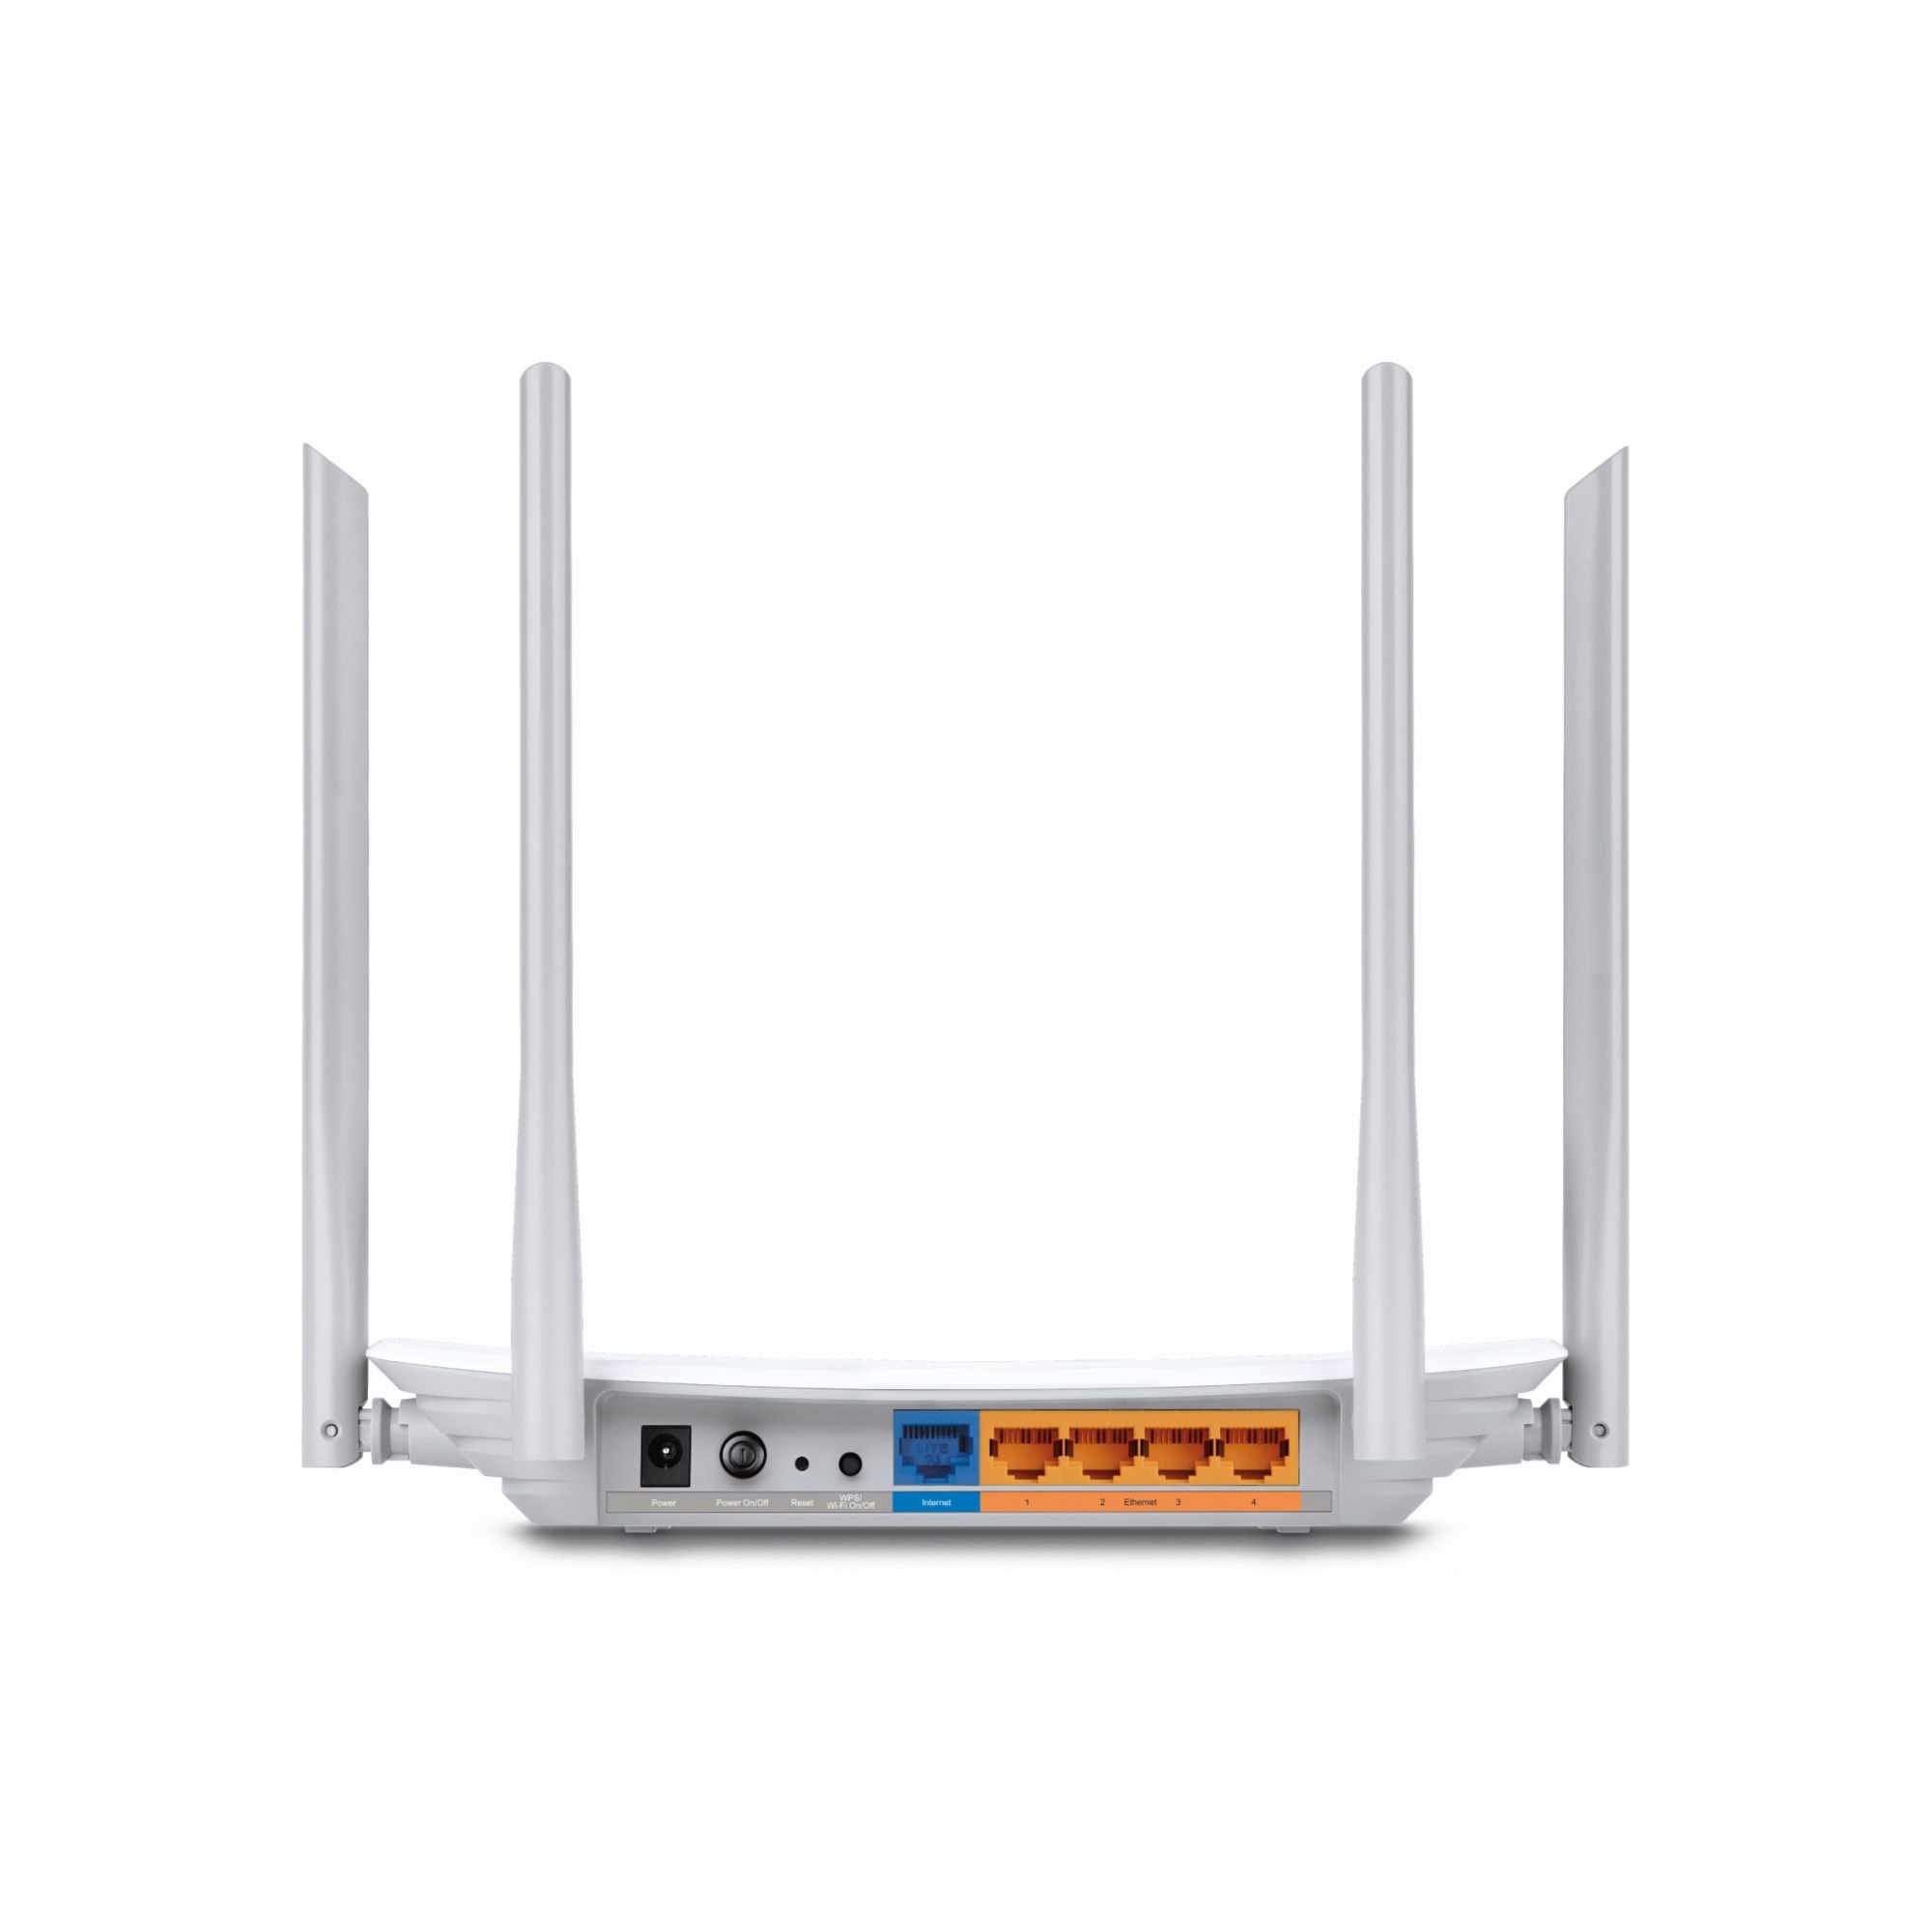 Router Wireless TP-Link ARCHER C50 v3, 1xWAN 10/100, 4xLAN 10/100, 4antene externe,dual-band AC1200 (300/867Mbps), Buton Wireless ON/OFF_7